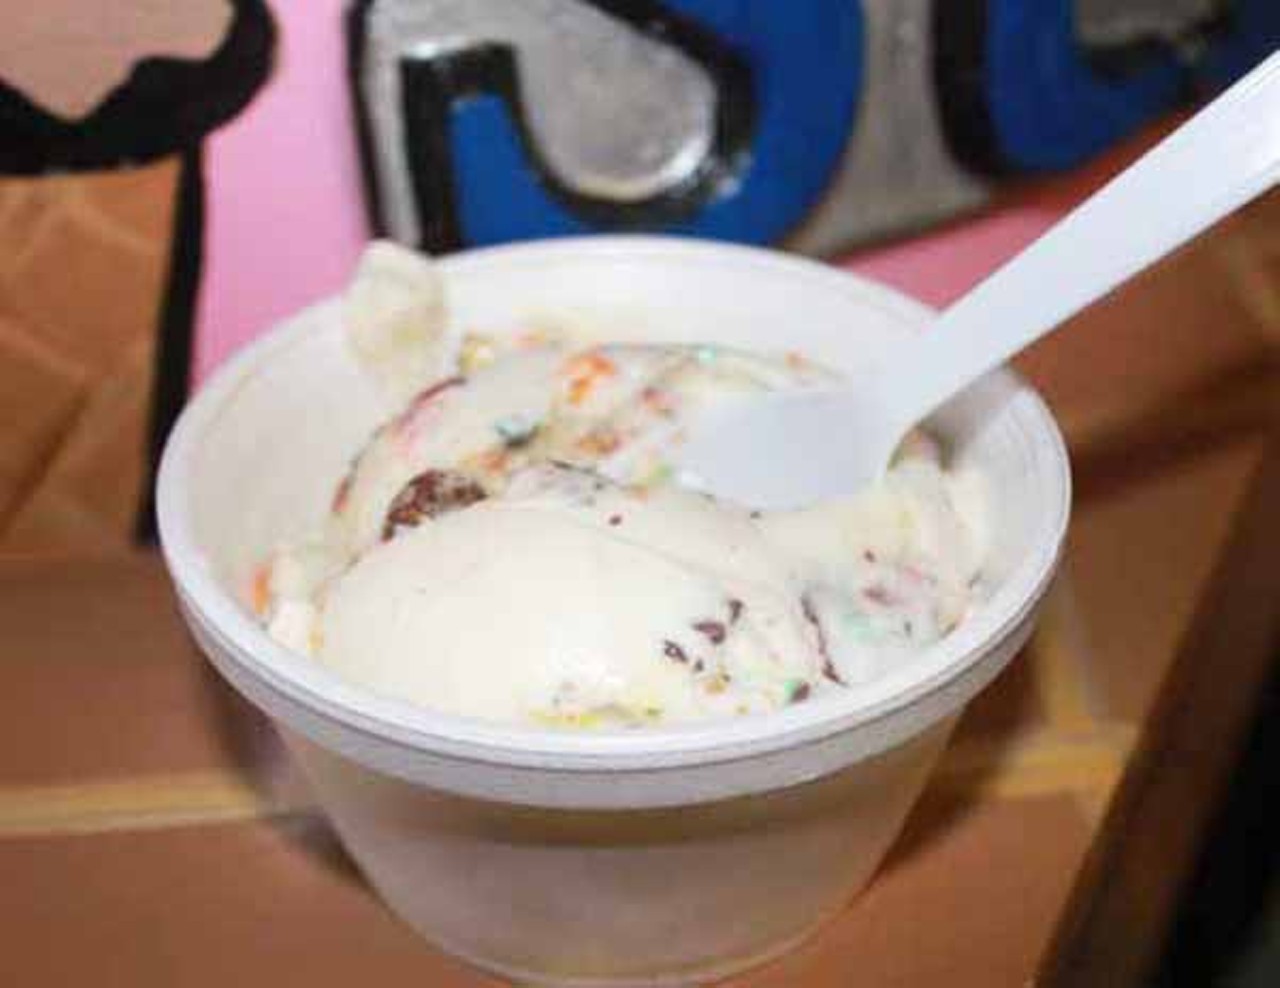 The marshmallow flavor at Webster's Serendipity Homemade Ice Cream is a decadent mess of toffee, M&Ms and Rolos.